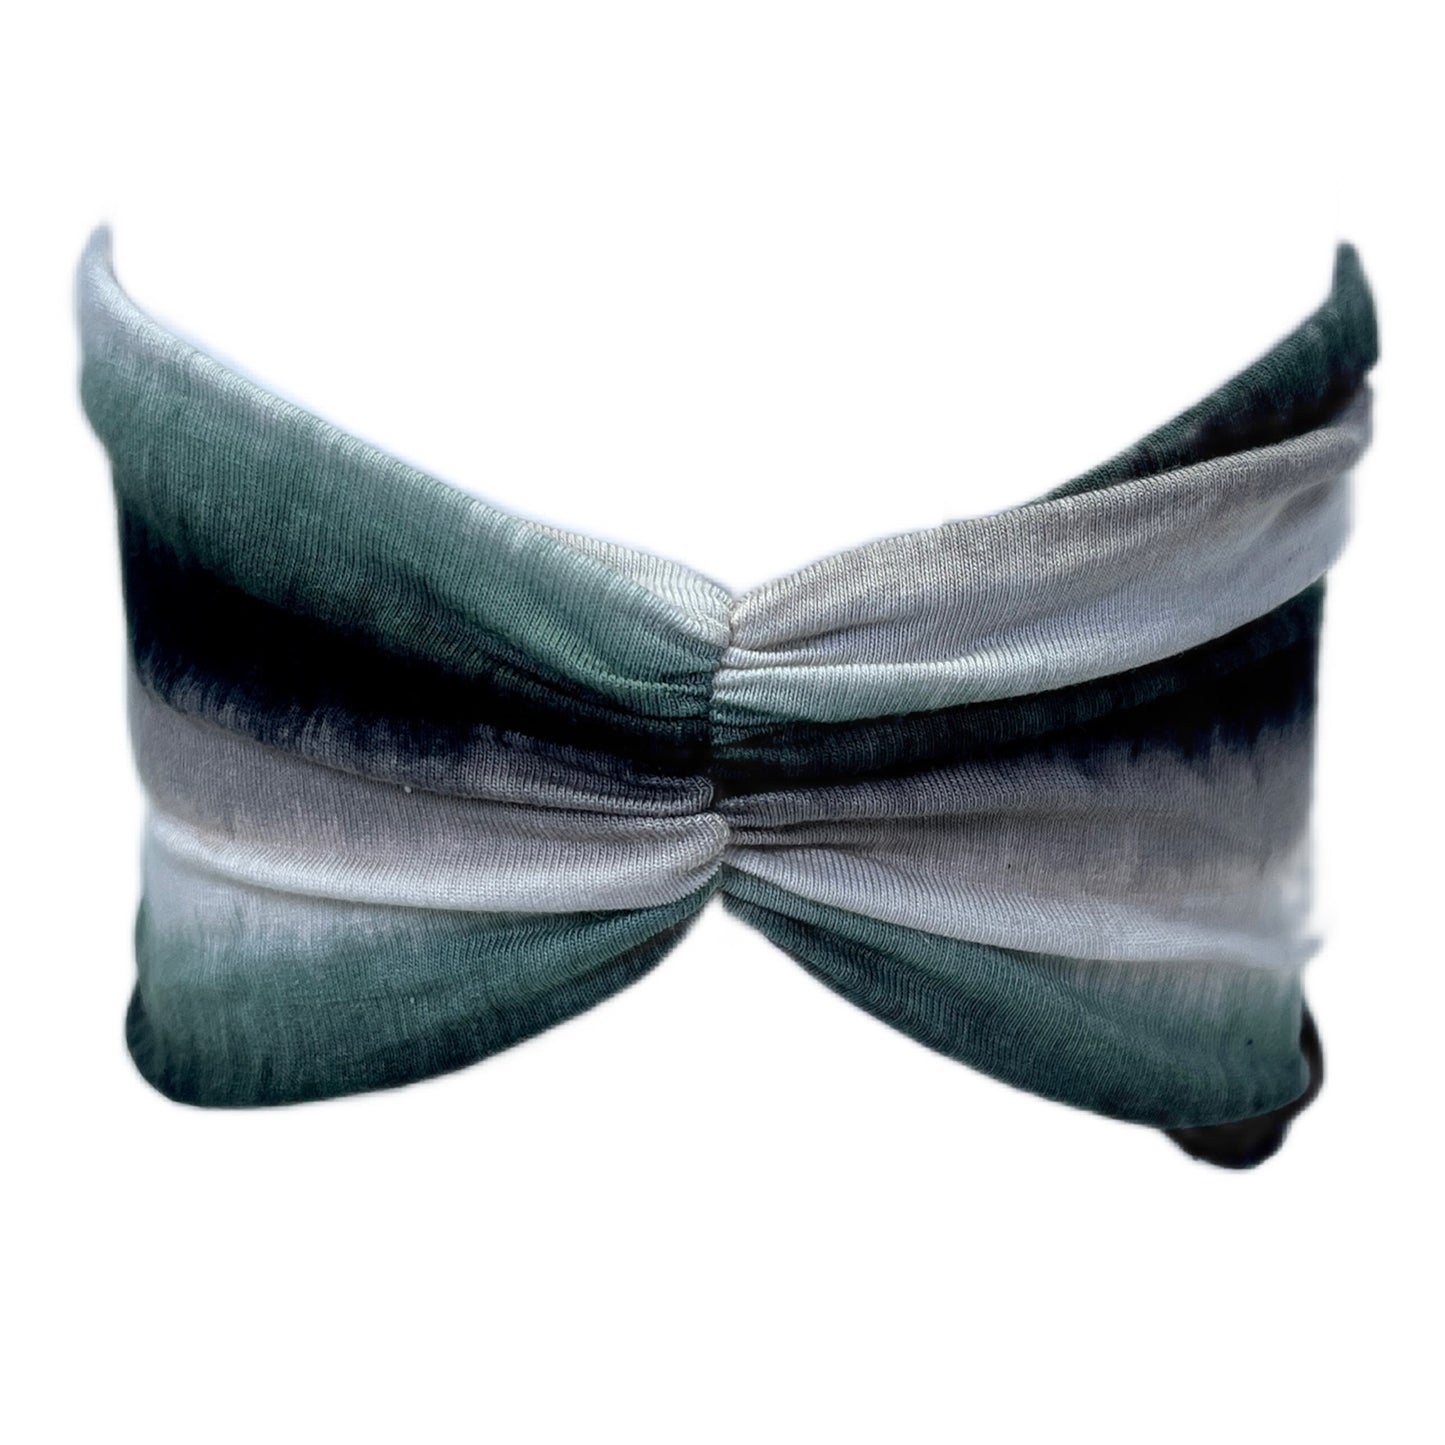 Hippie Striped Breathable Yoga Hair Accessory - Stay Cool During Your Practice